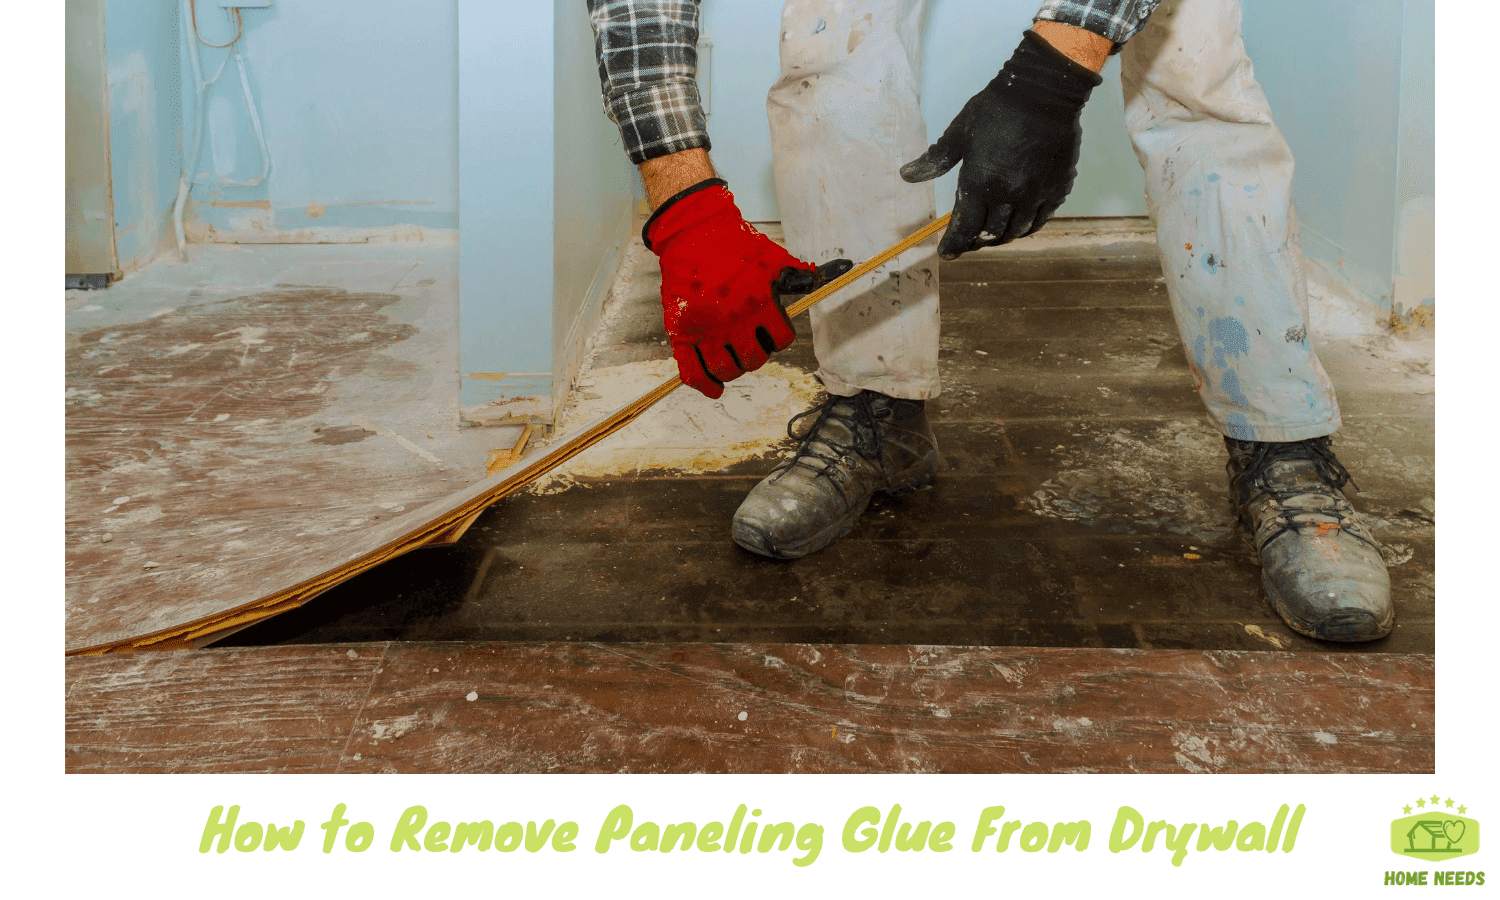 How to Remove Paneling Glue From Drywall